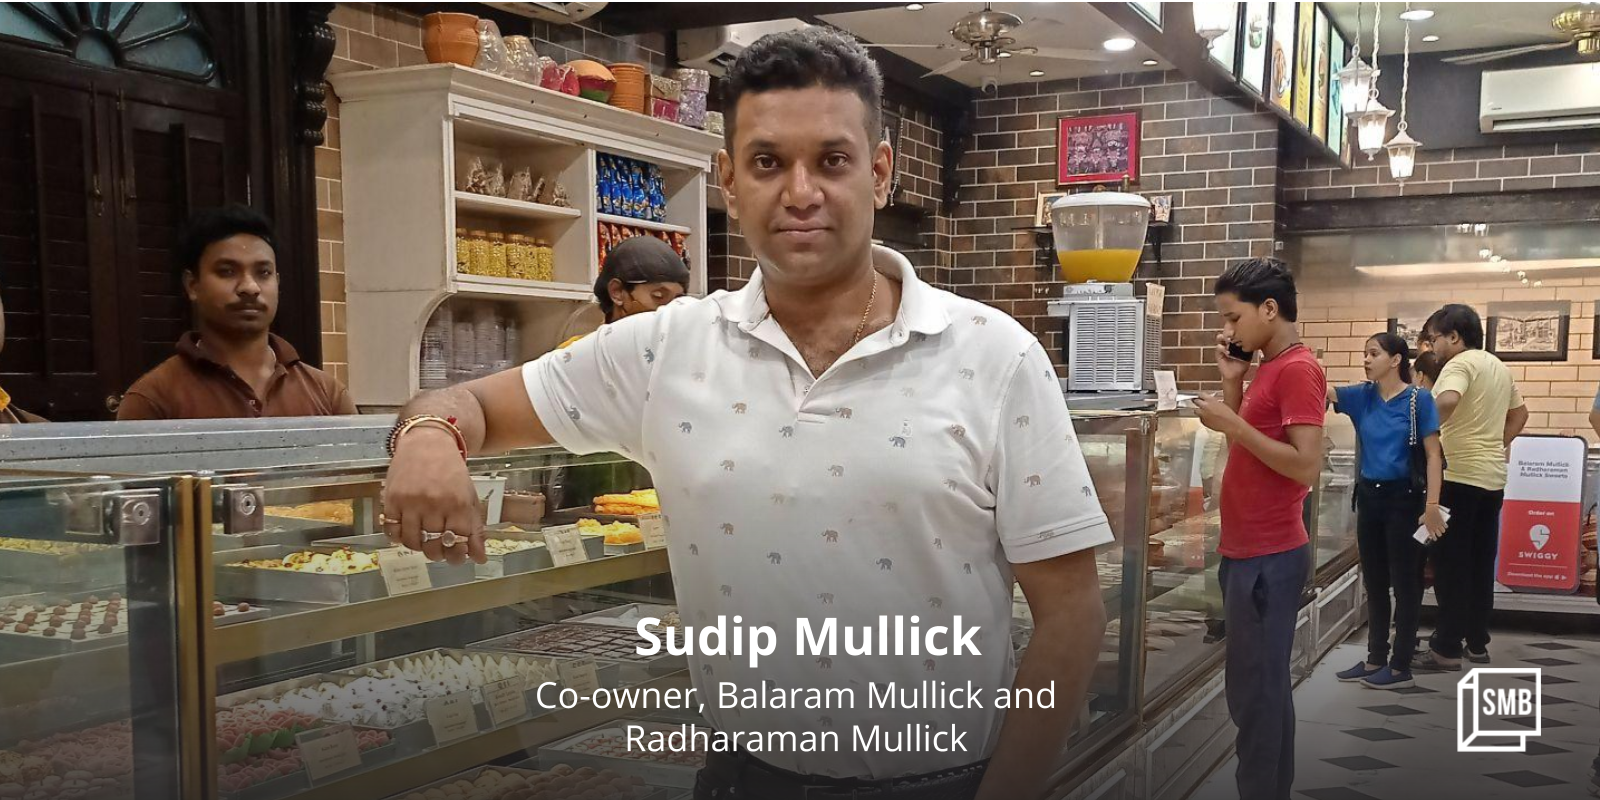 Meet the Mullick who is carrying on a ‘sweet’ business legacy of over 130 years in Kolkata